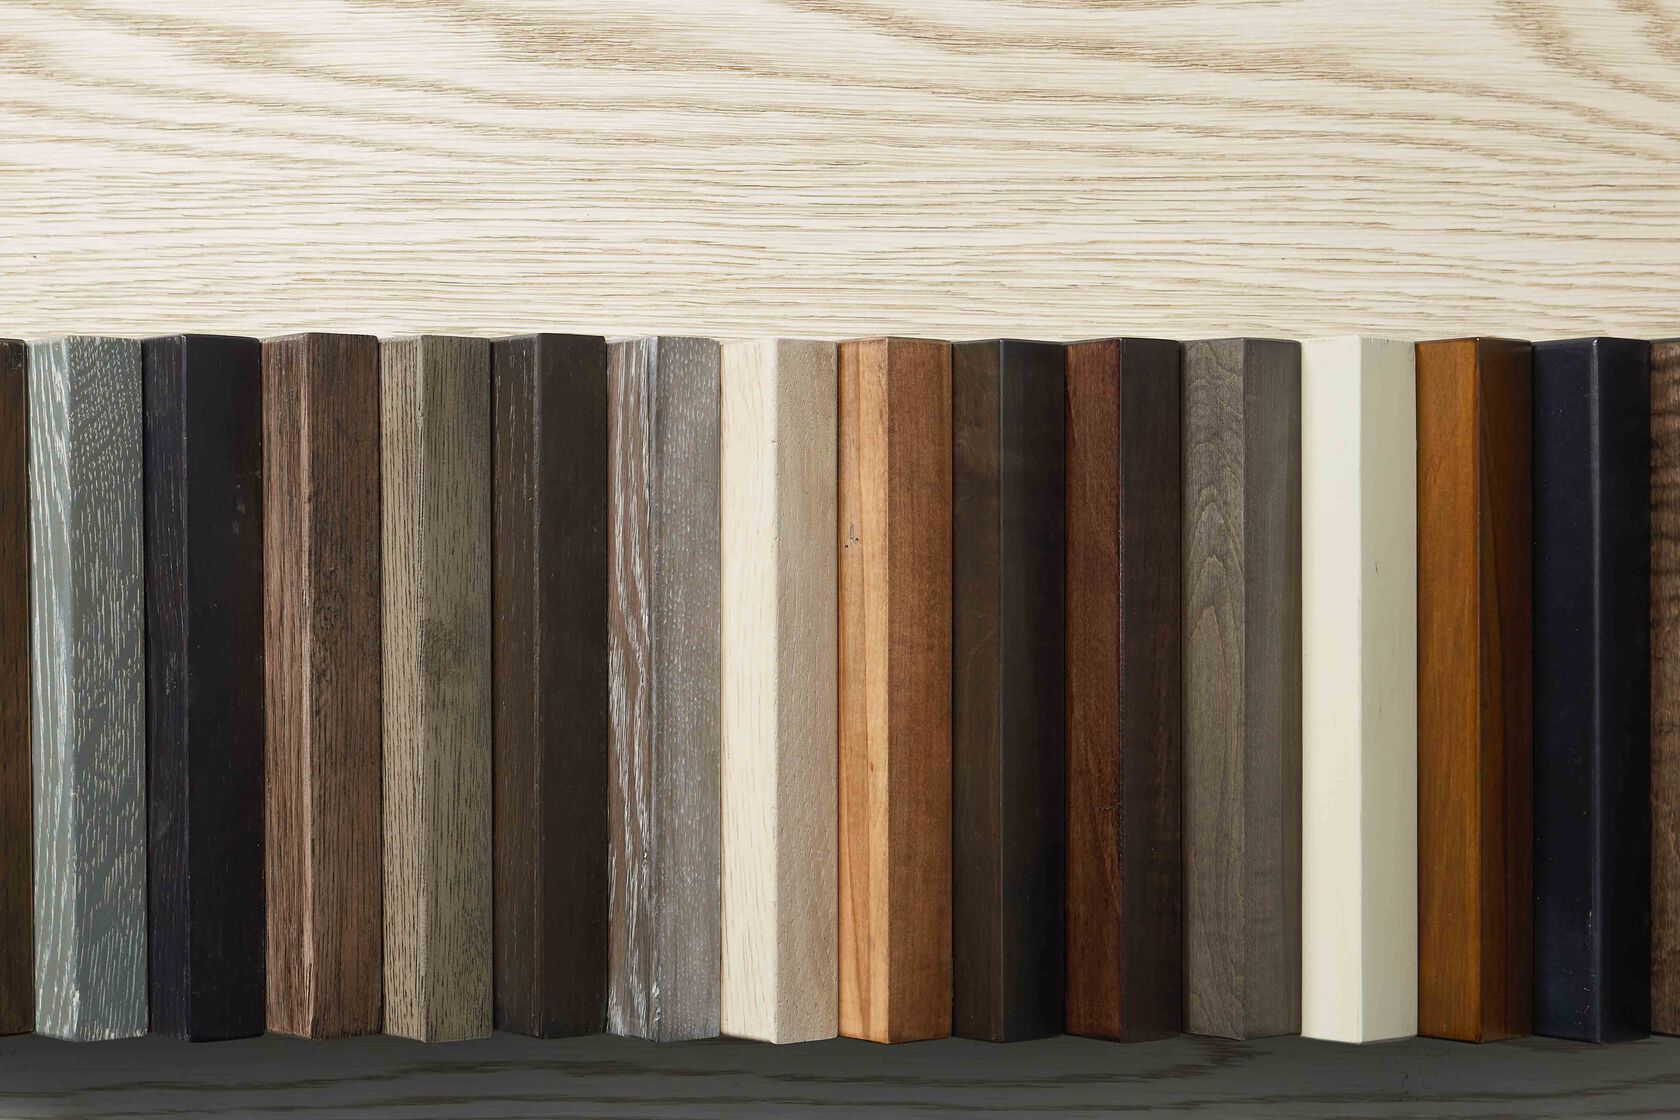 Assortment of wood finishes and colors